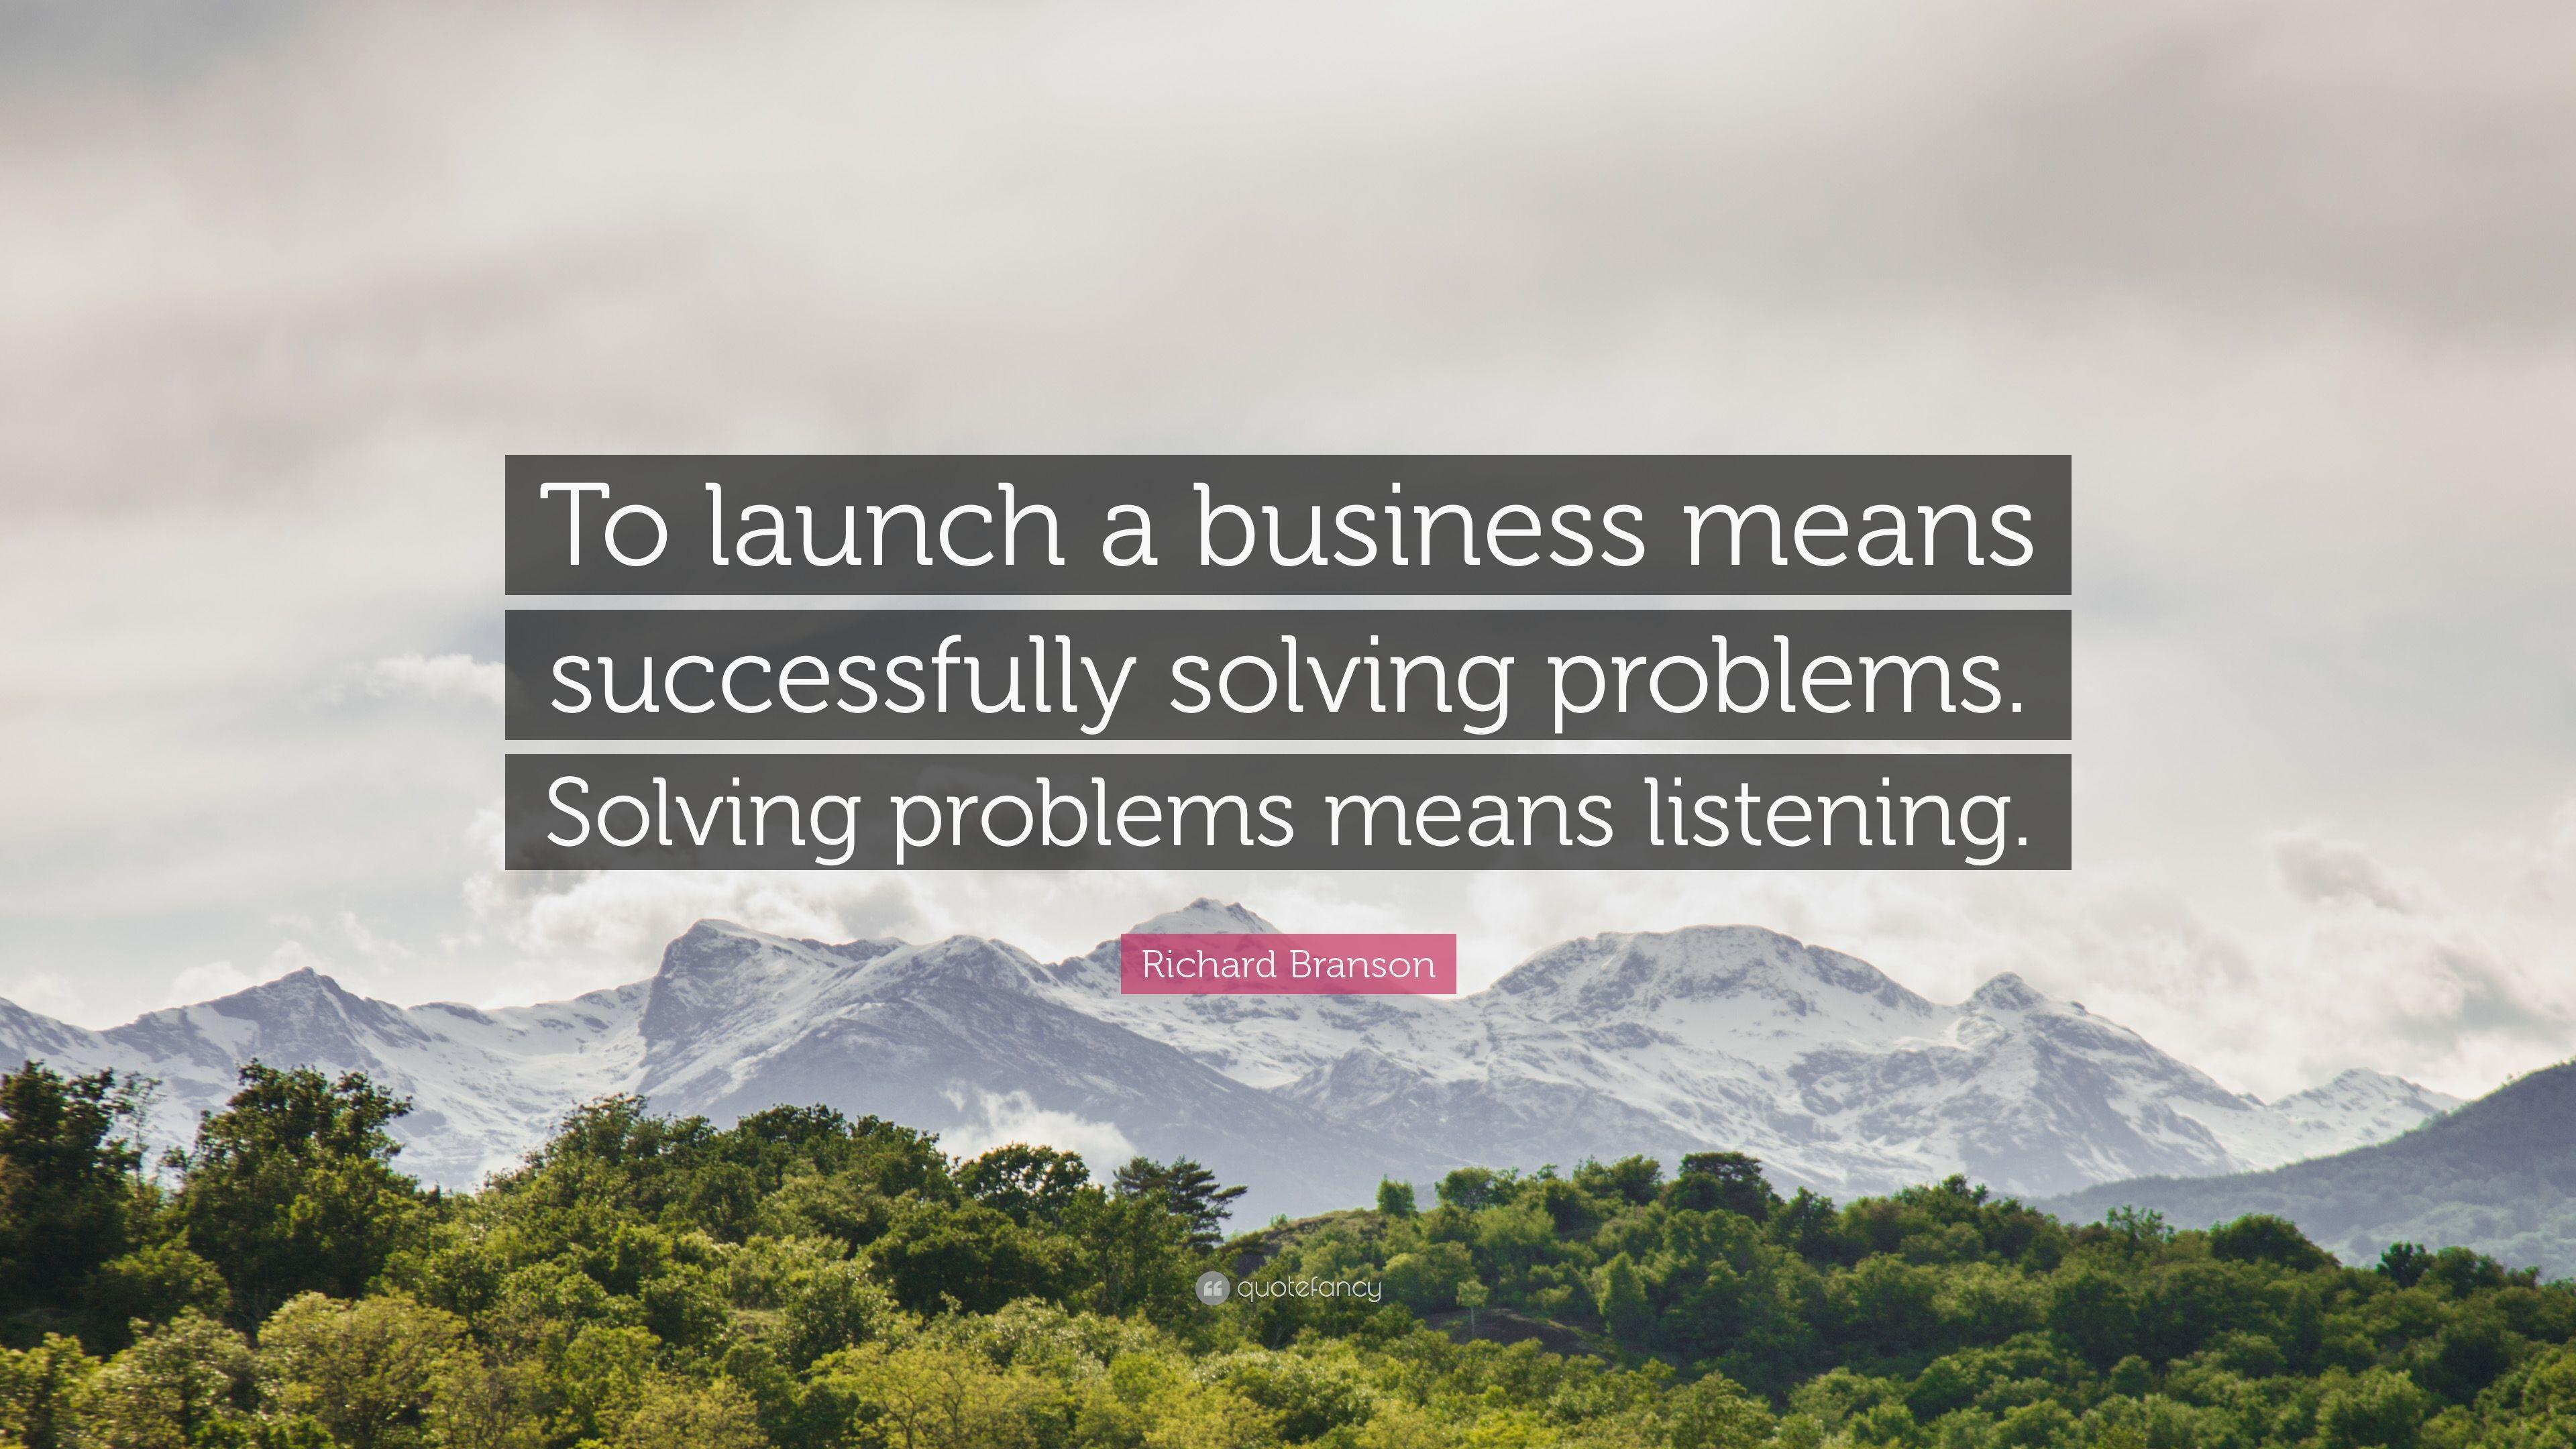 Richard Branson Quote: “To launch a business means successfully